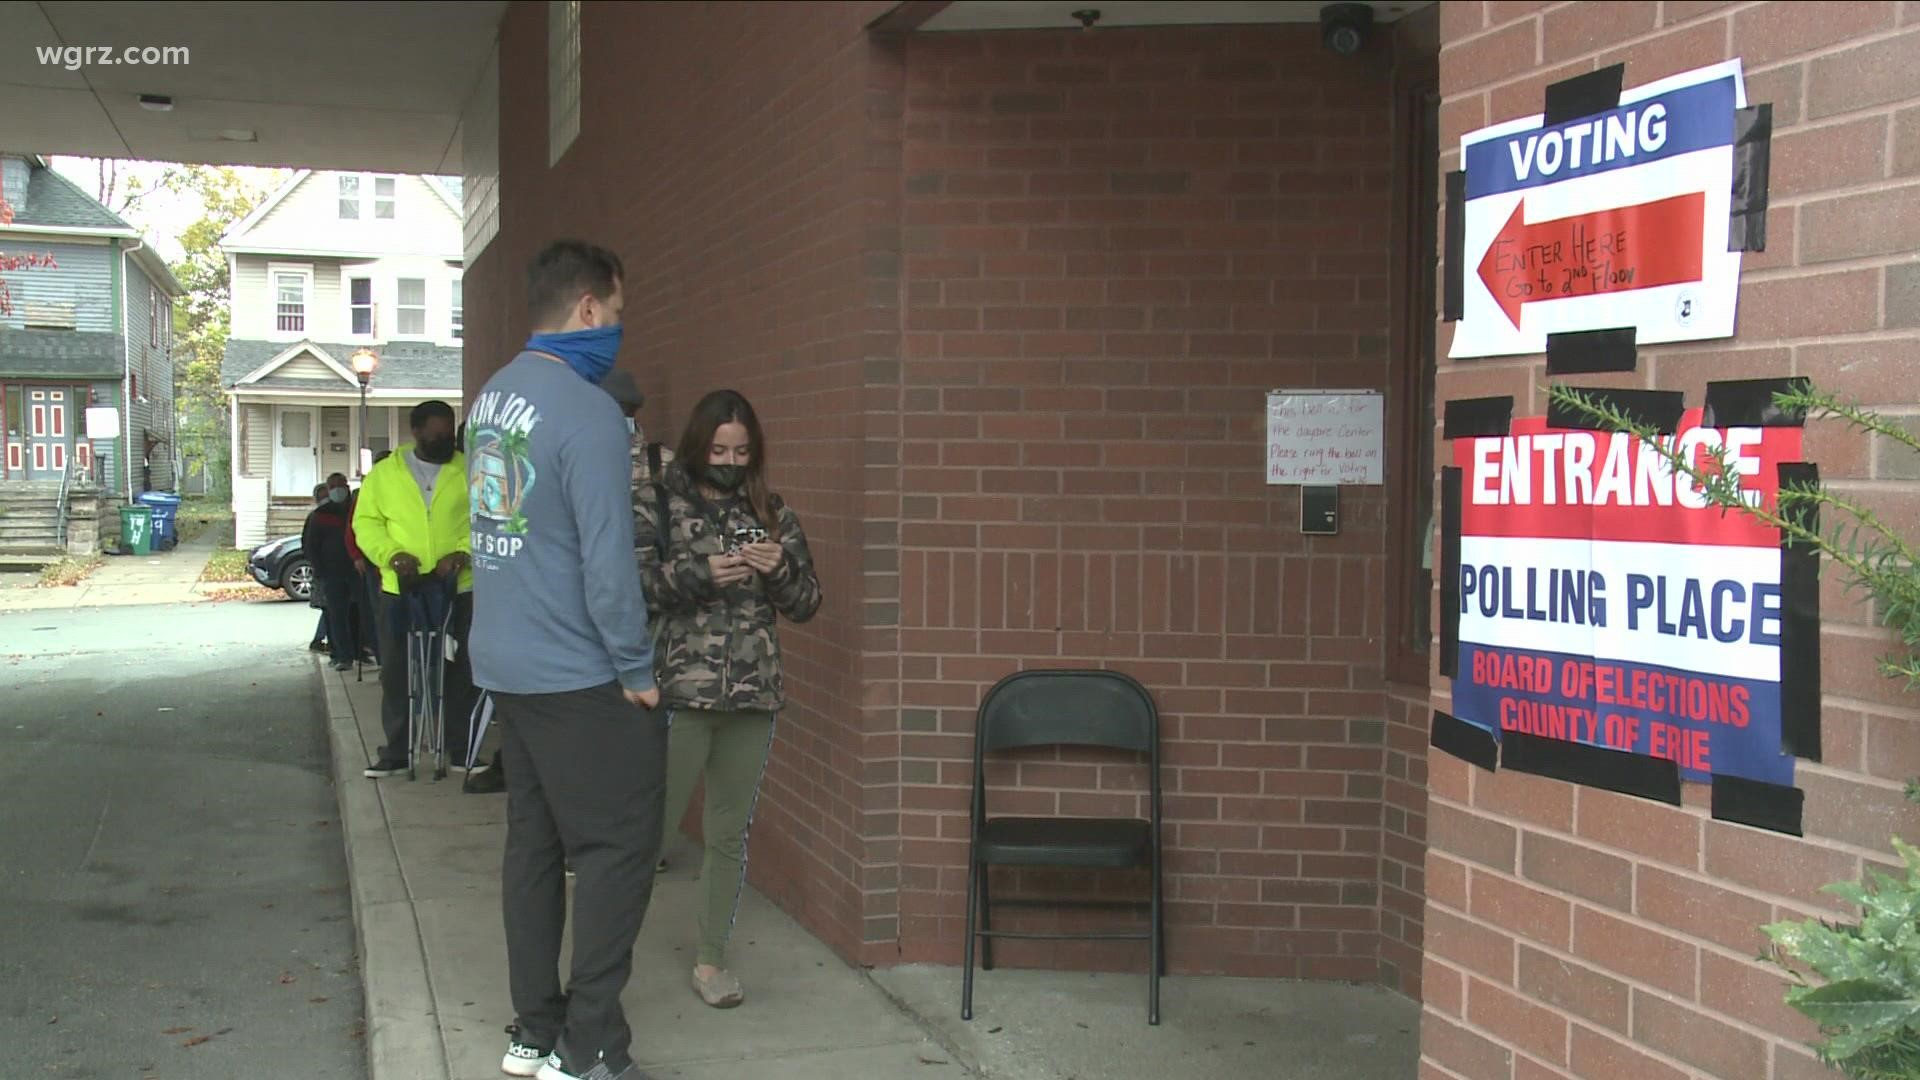 We are just a day away from Early Voting starting across the state. Channel 2' tells us what's expected and where there could be lines at polls.